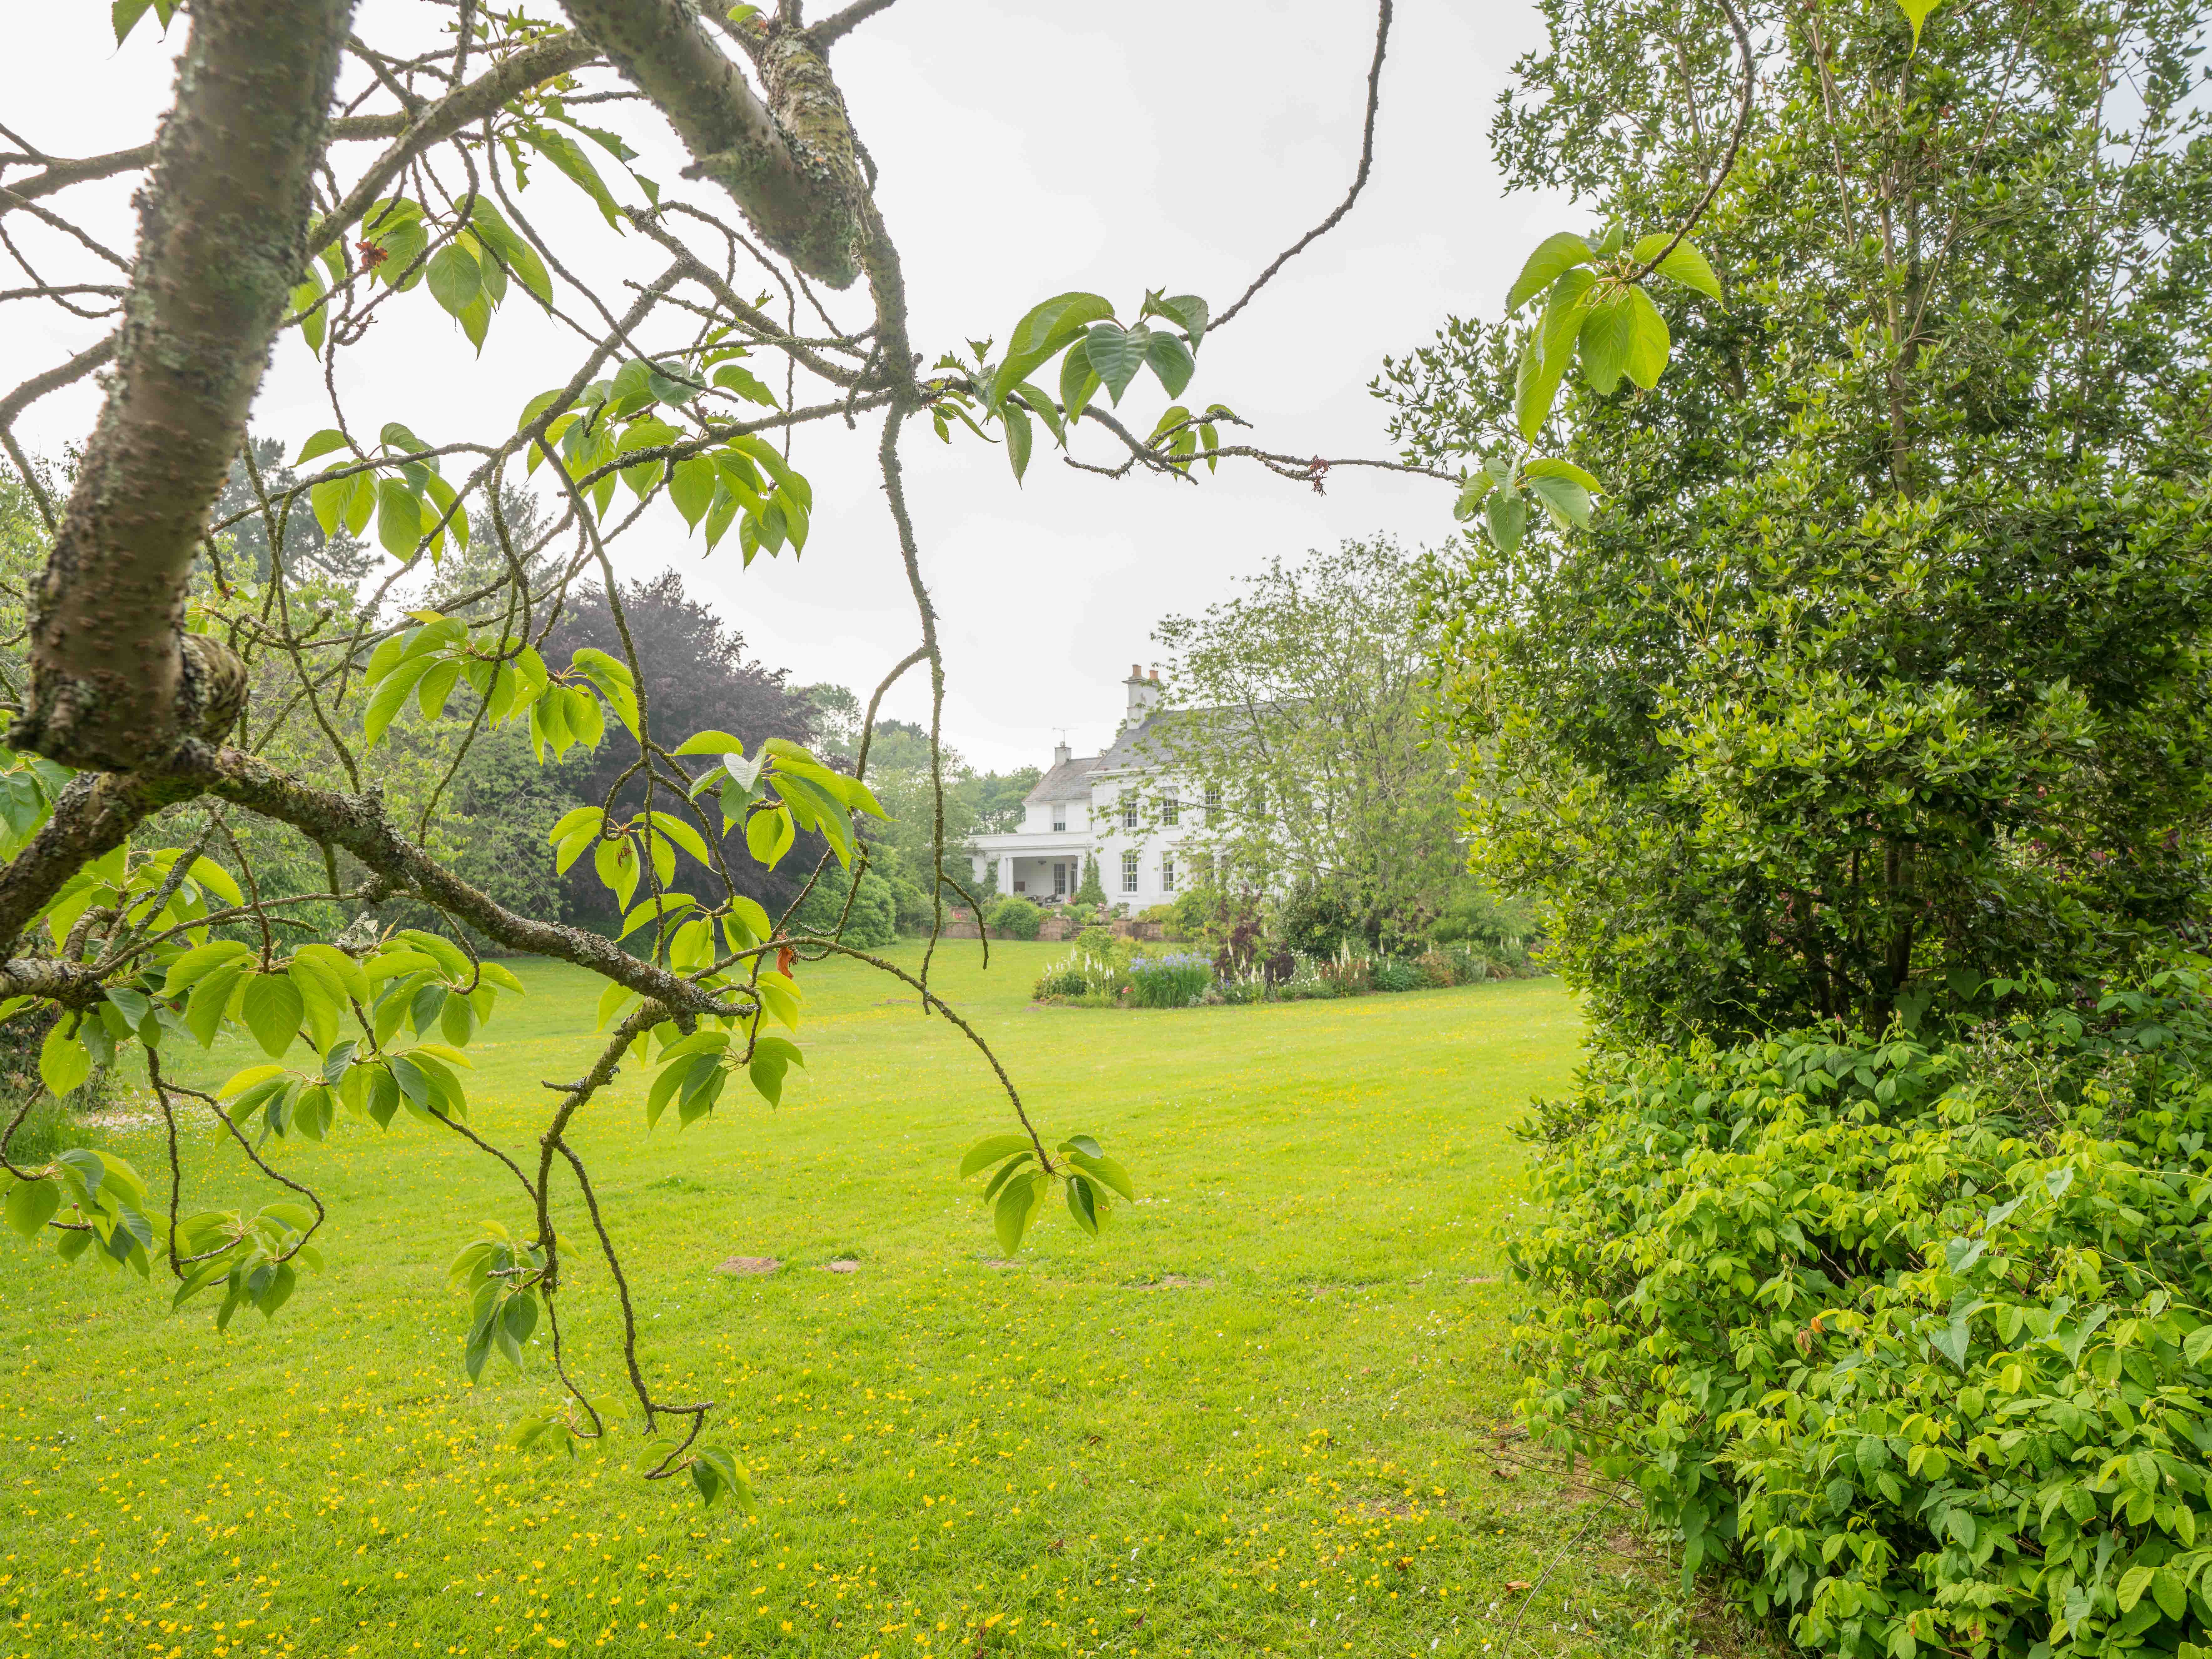 The extensive gardens surrounding the owners property are available to explore